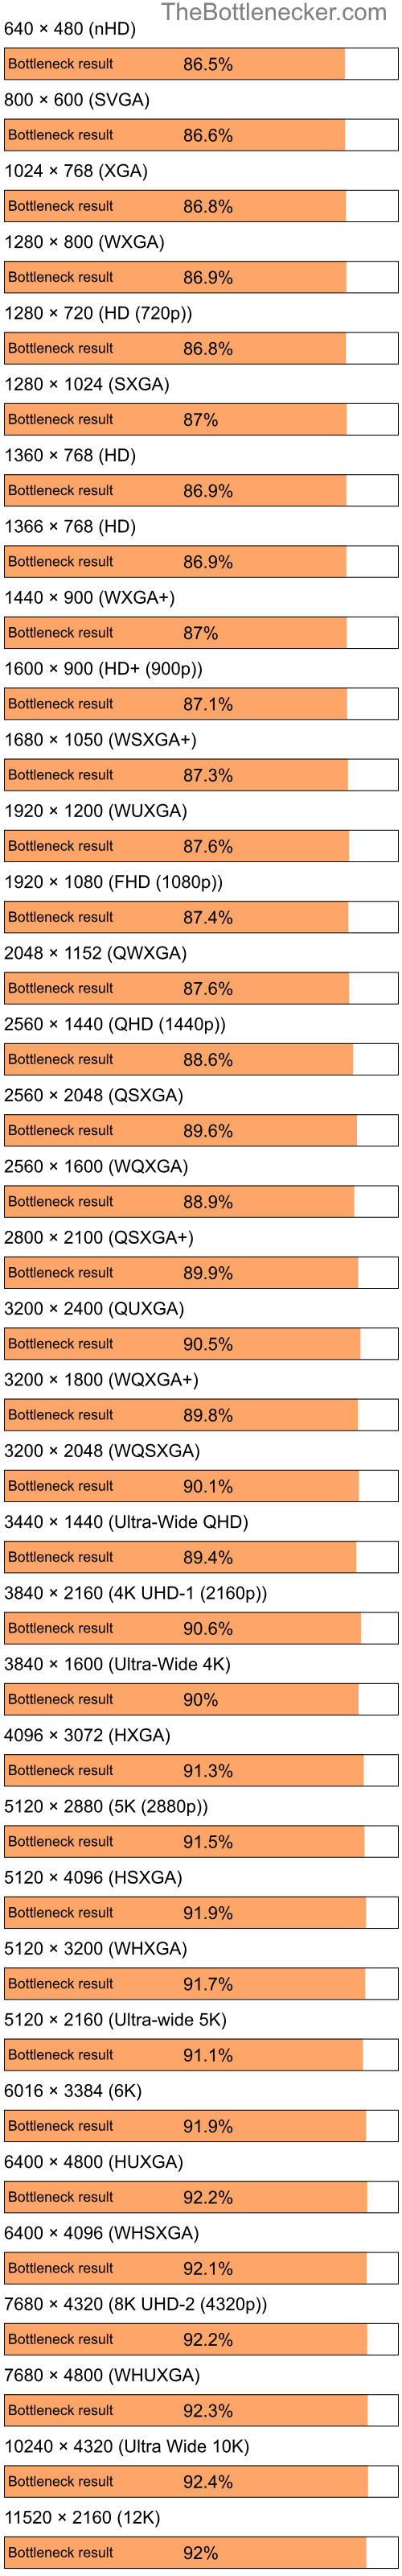 Bottleneck results by resolution for Intel Atom N280 and NVIDIA GeForce4 Ti 4200 in Processor Intense Tasks